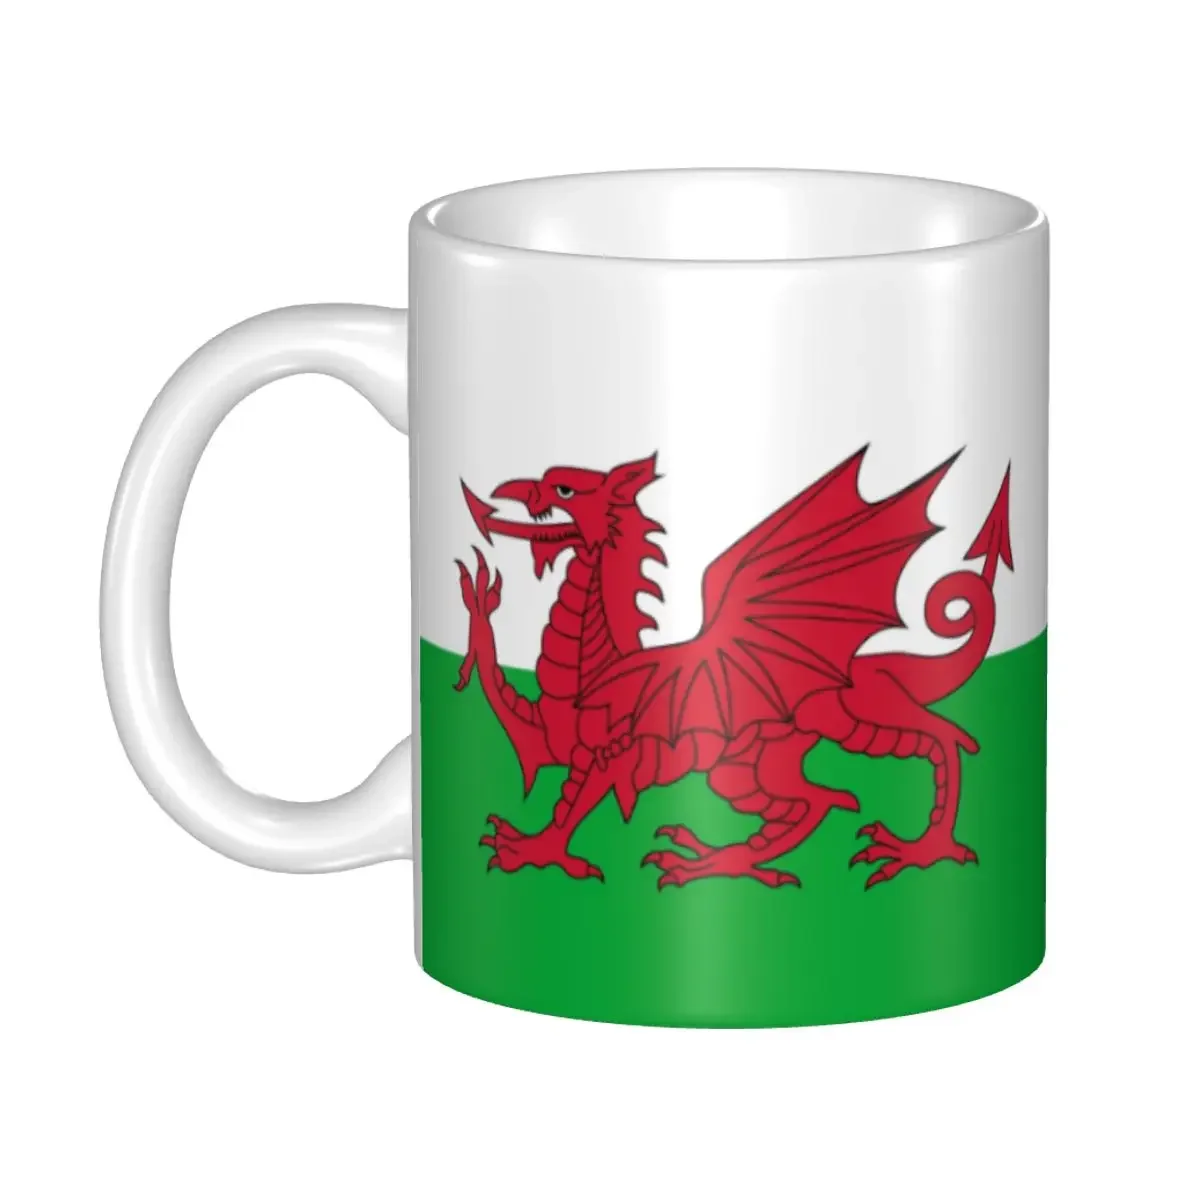 

Flag Of Wales Mug Personalized Welsh Dragon Ceramic Coffee Mug Cup Creative Present Outdoor Work Camping Cups And Mugs